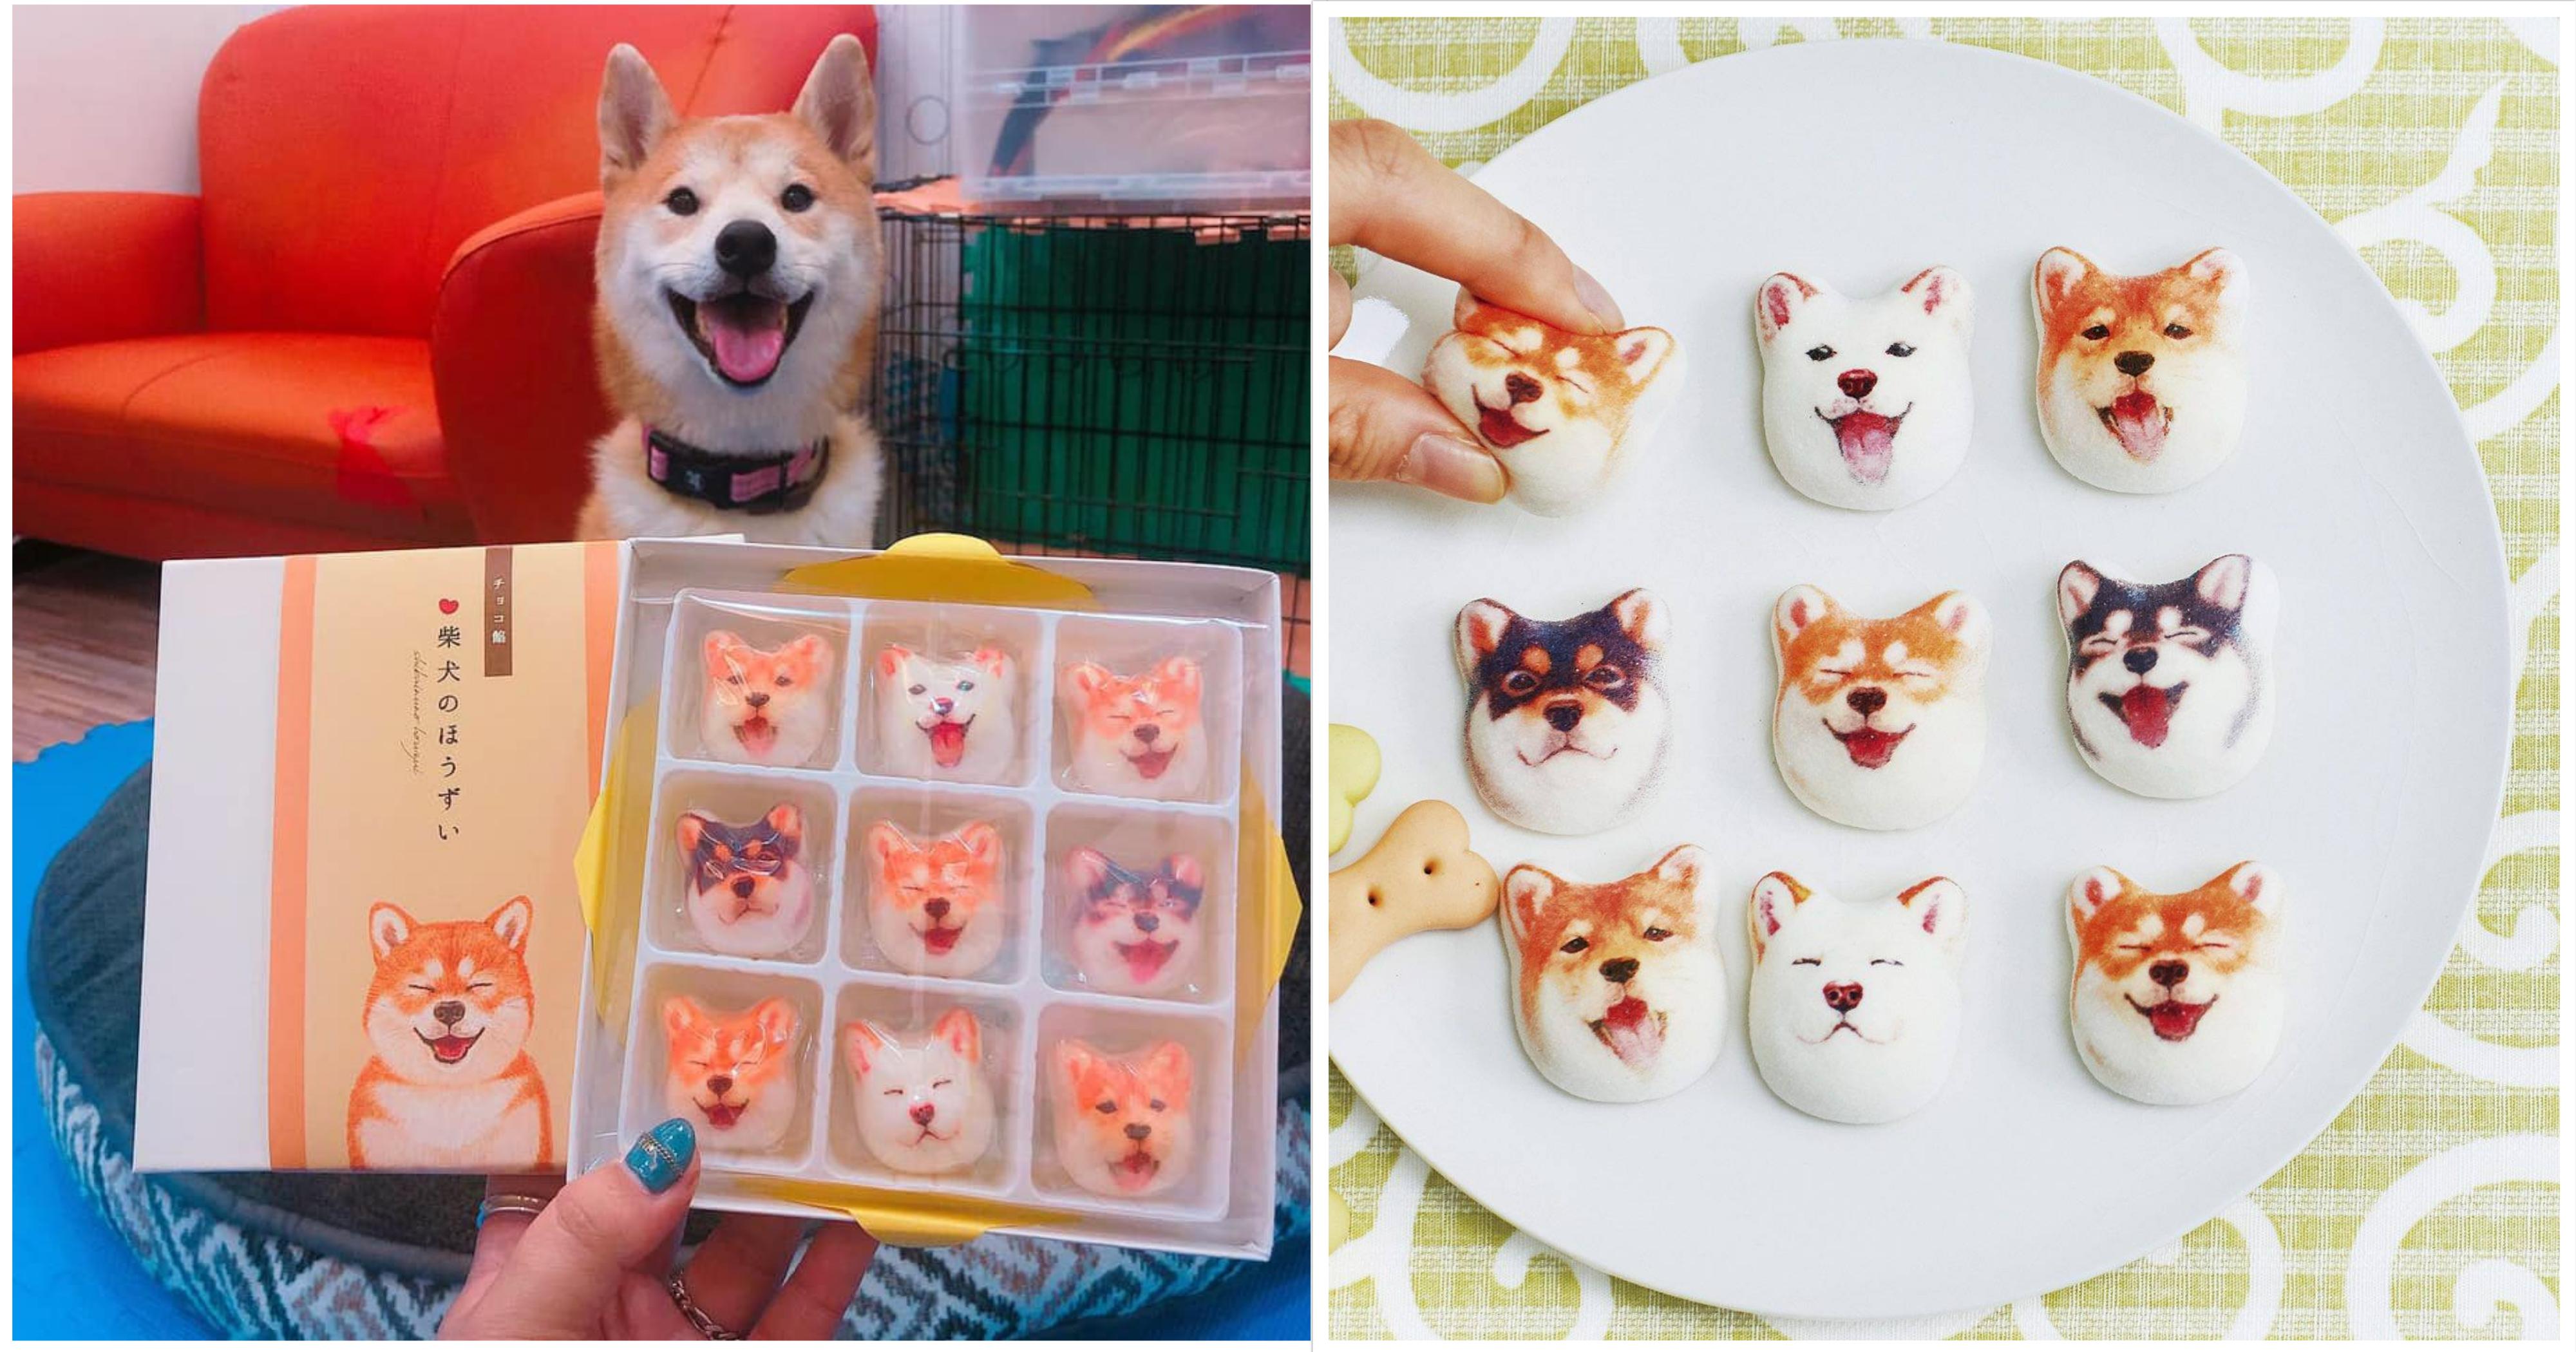 Boxes of Shiba Inu marshmallows now on sale in Japan for 1,200 yen 